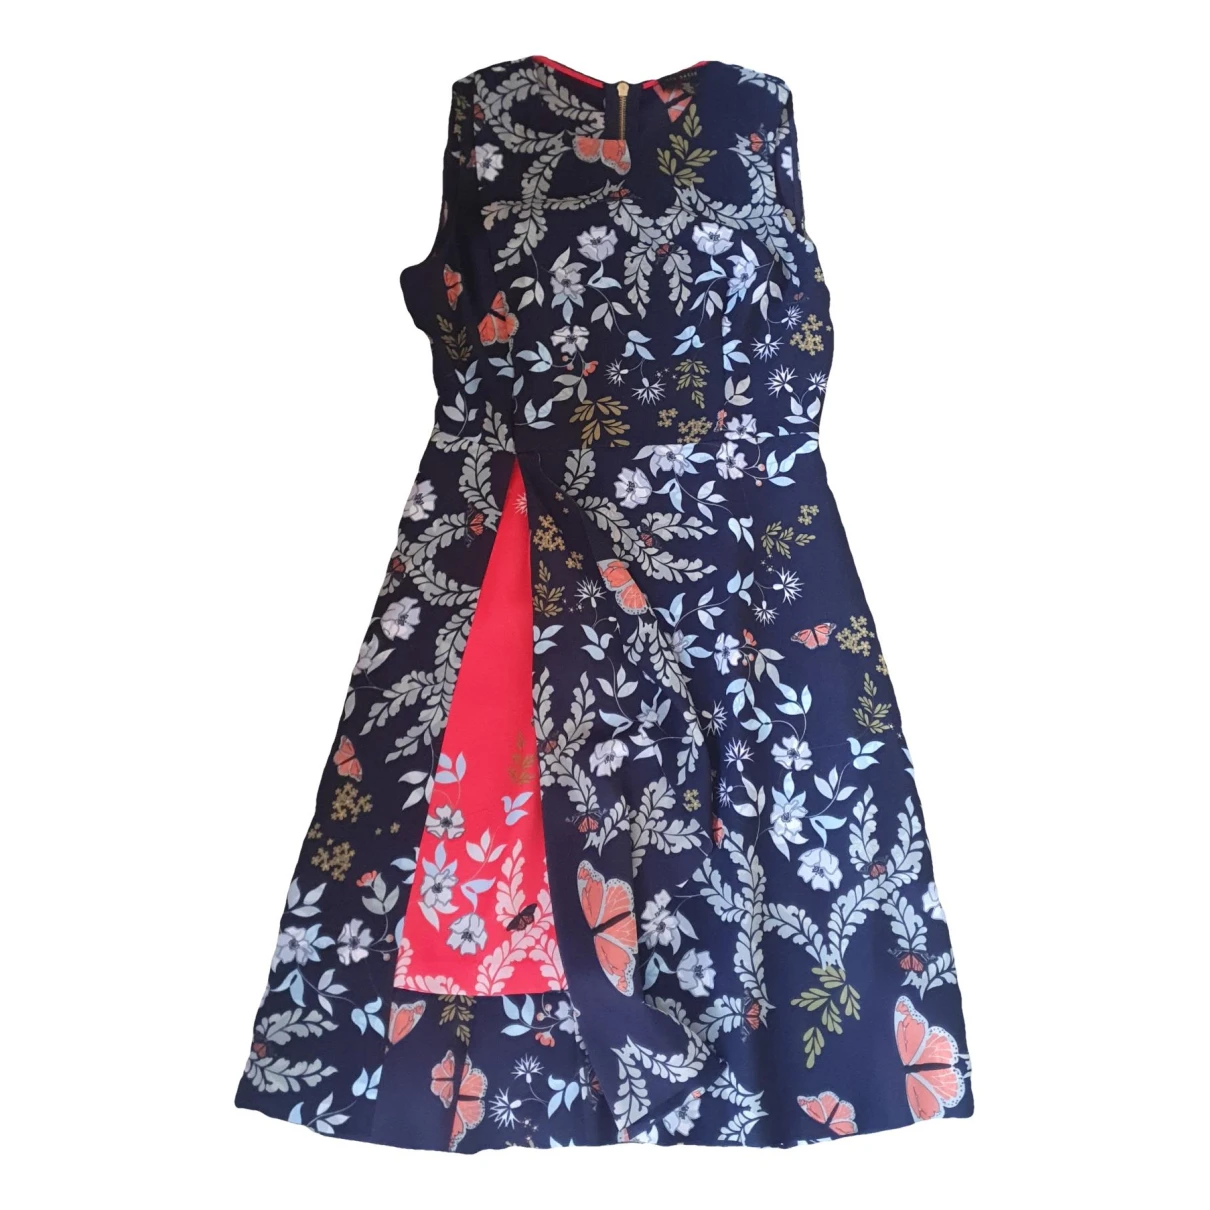 clothing Ted Baker dresses for Female Polyester 12 UK. Used condition